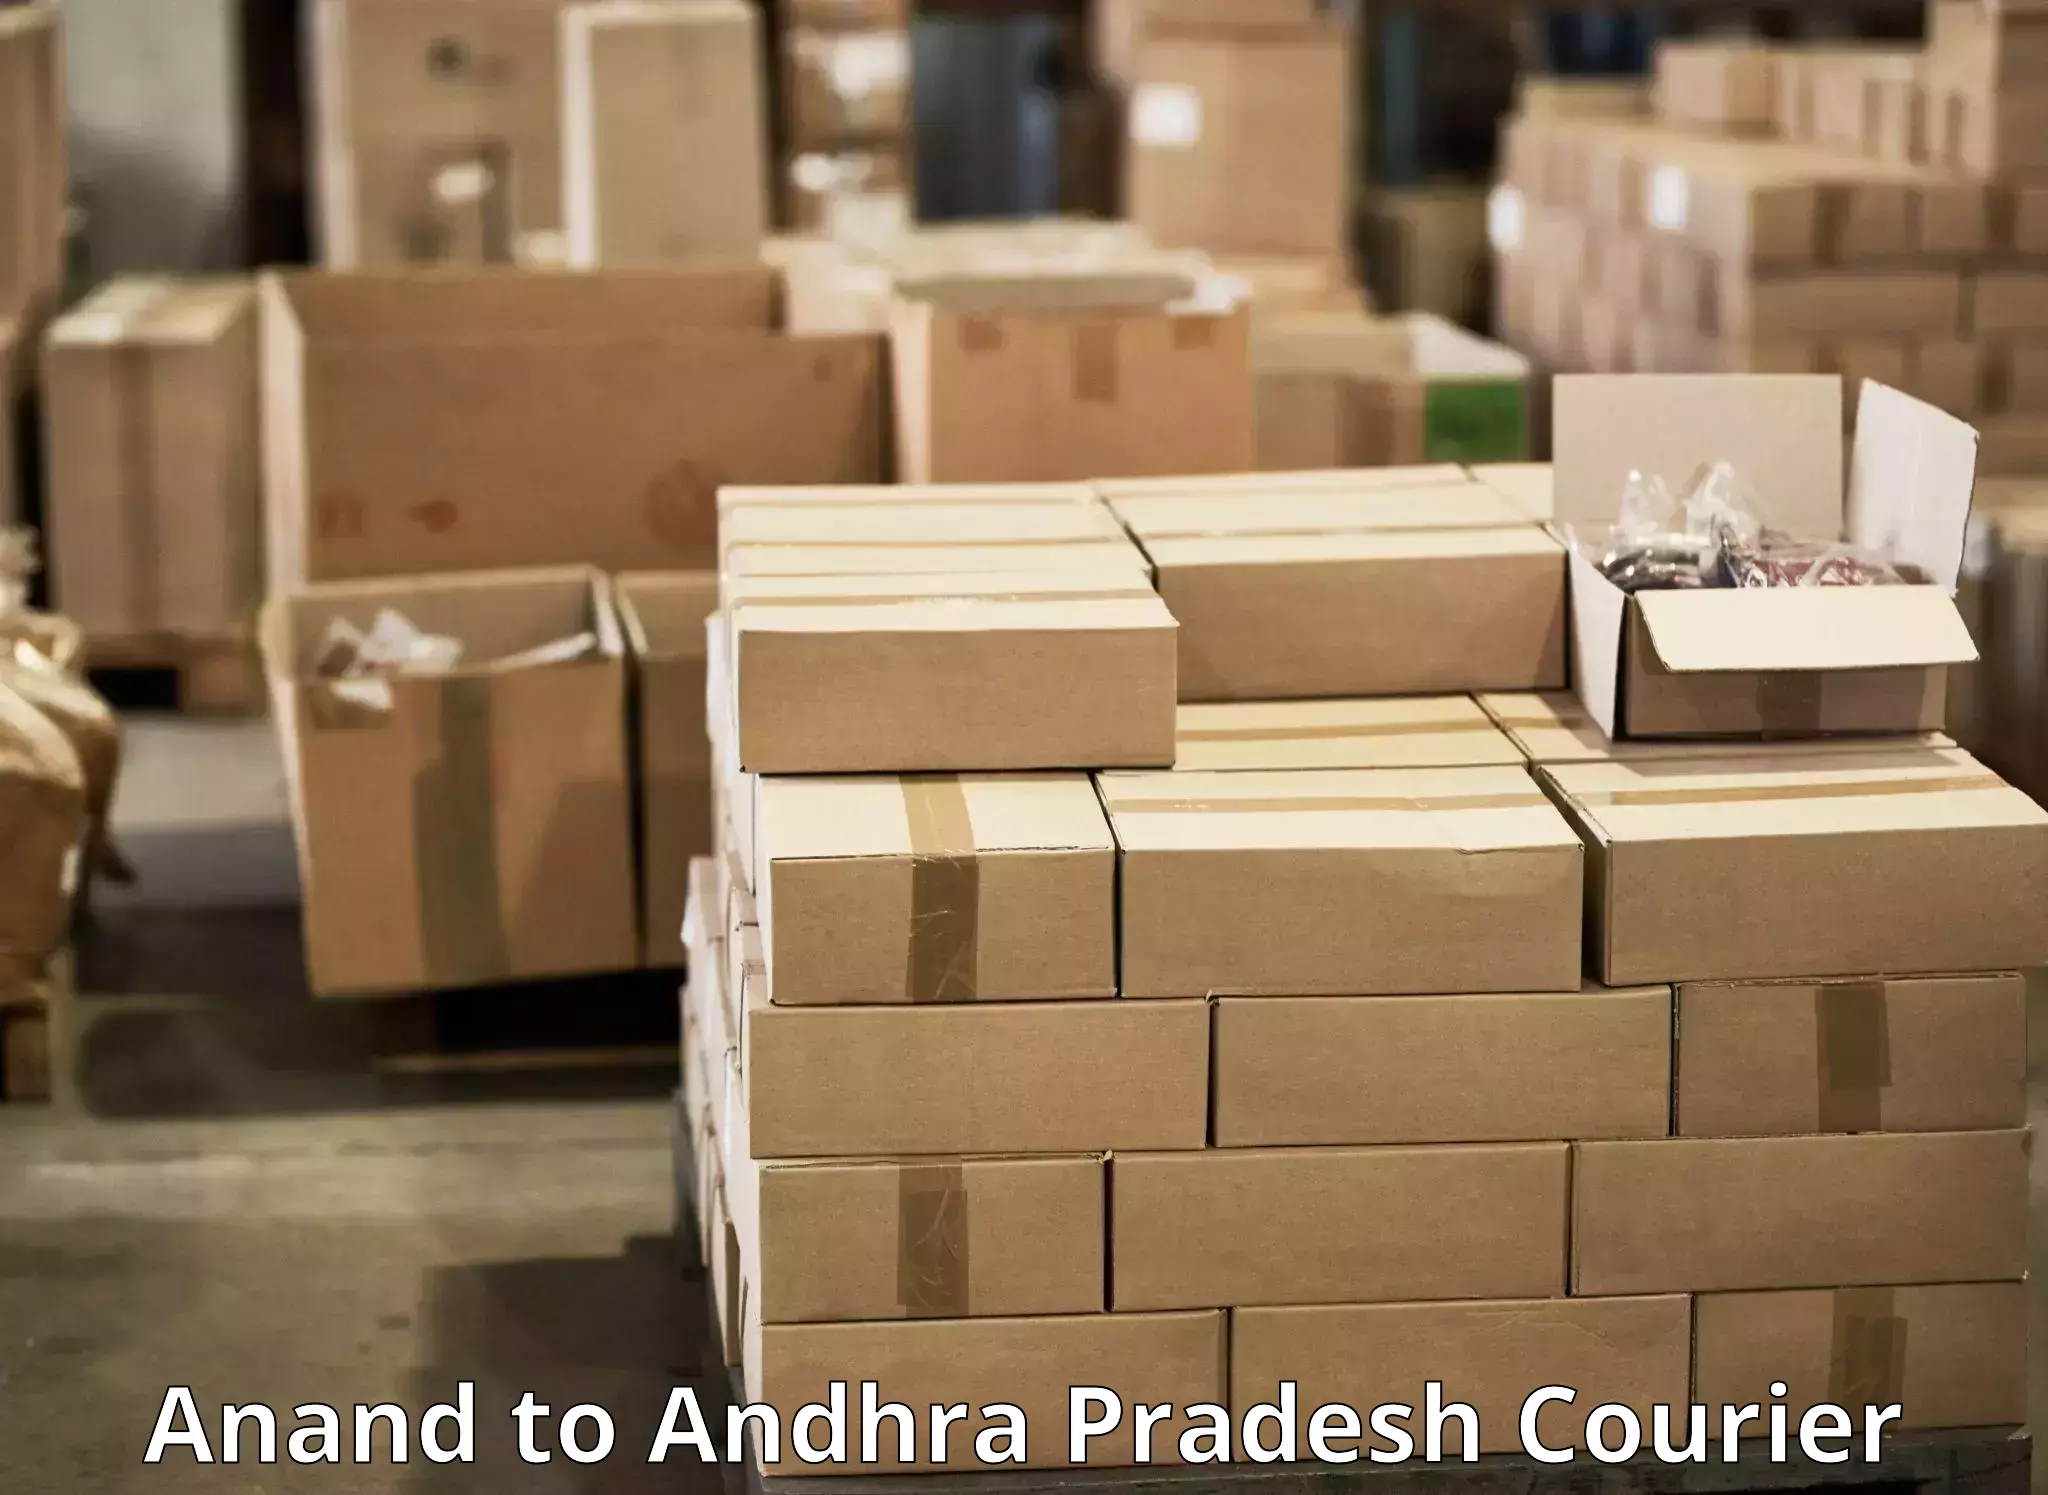 24/7 courier service in Anand to Machilipatnam